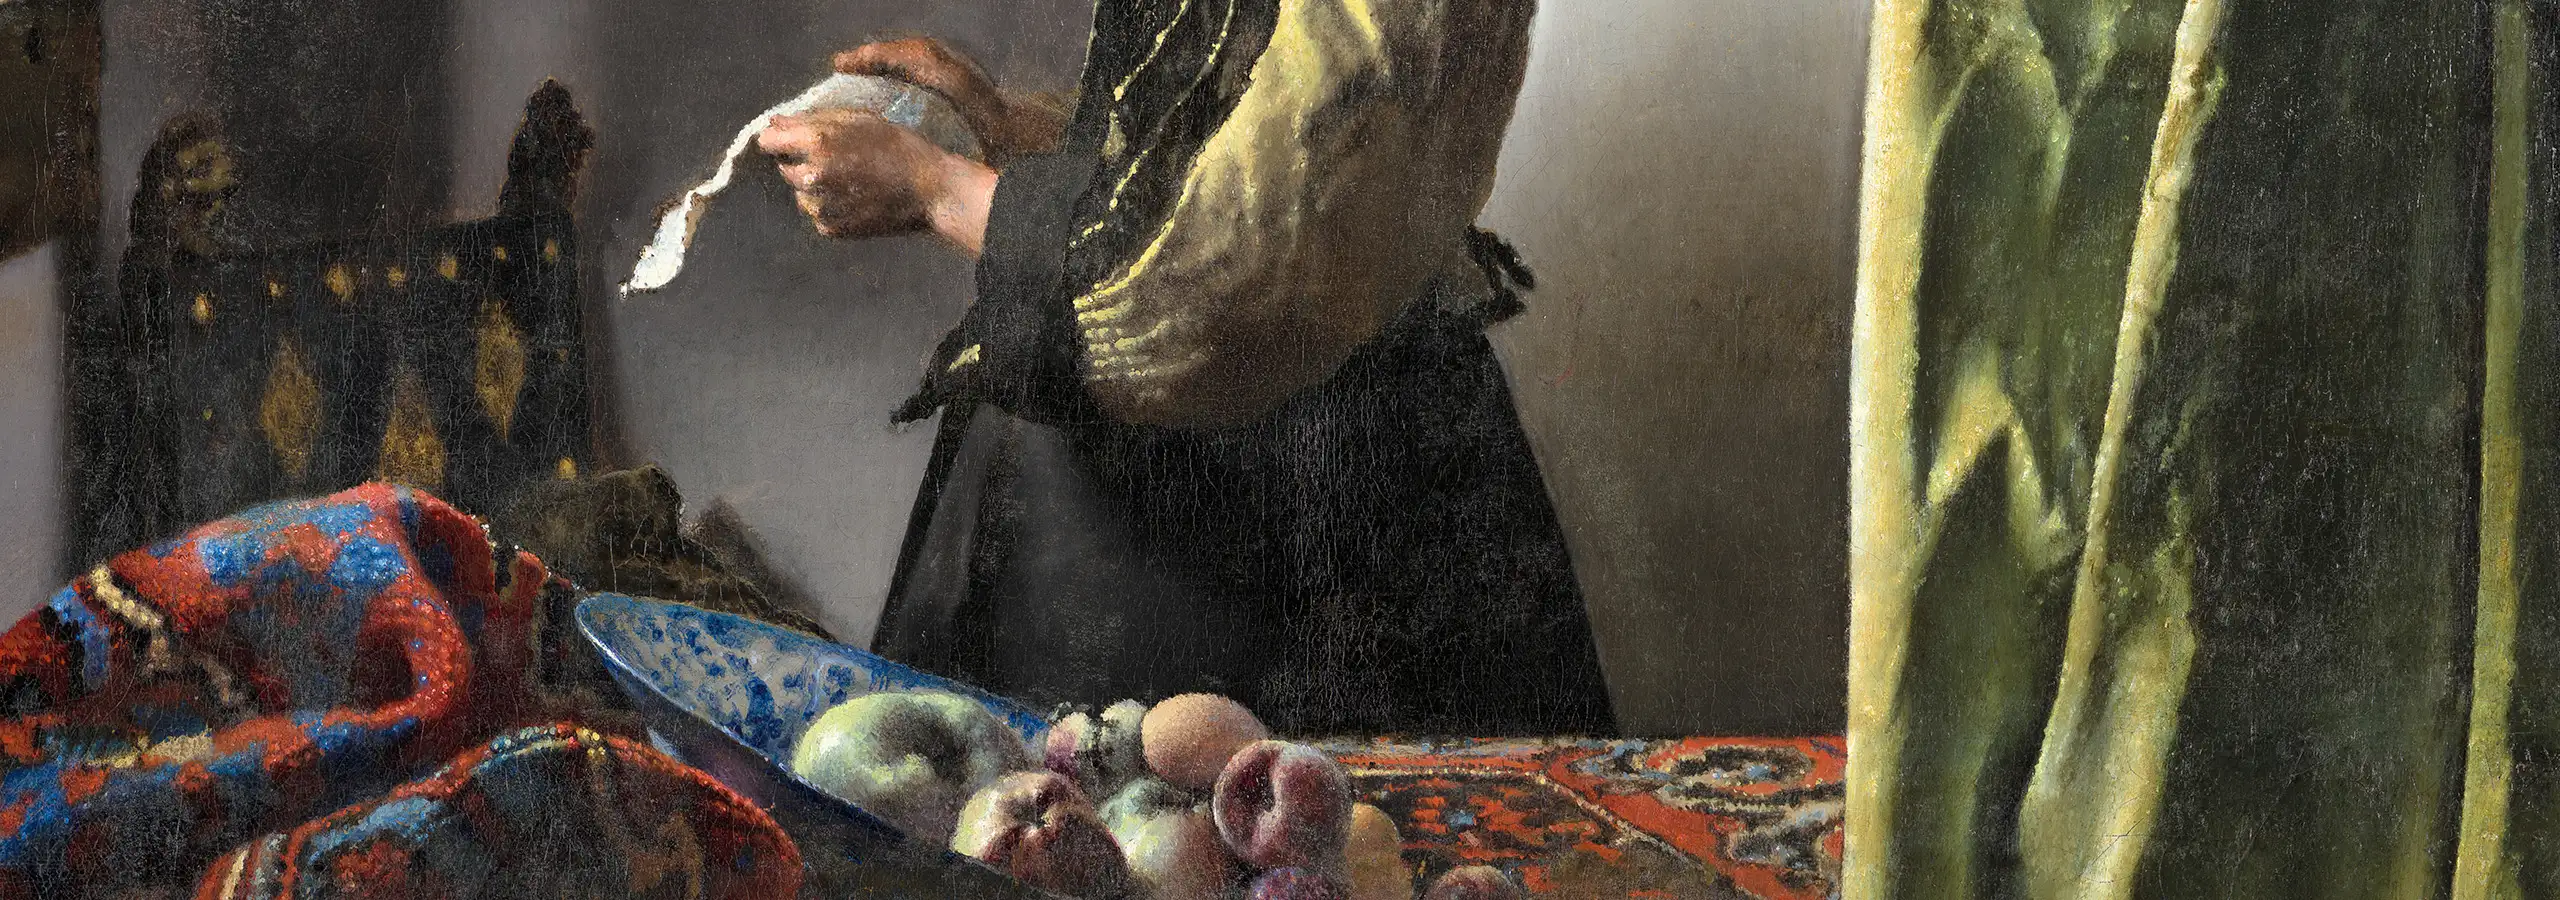 Vermeer and flower still life through the lens of Bas Meeuws